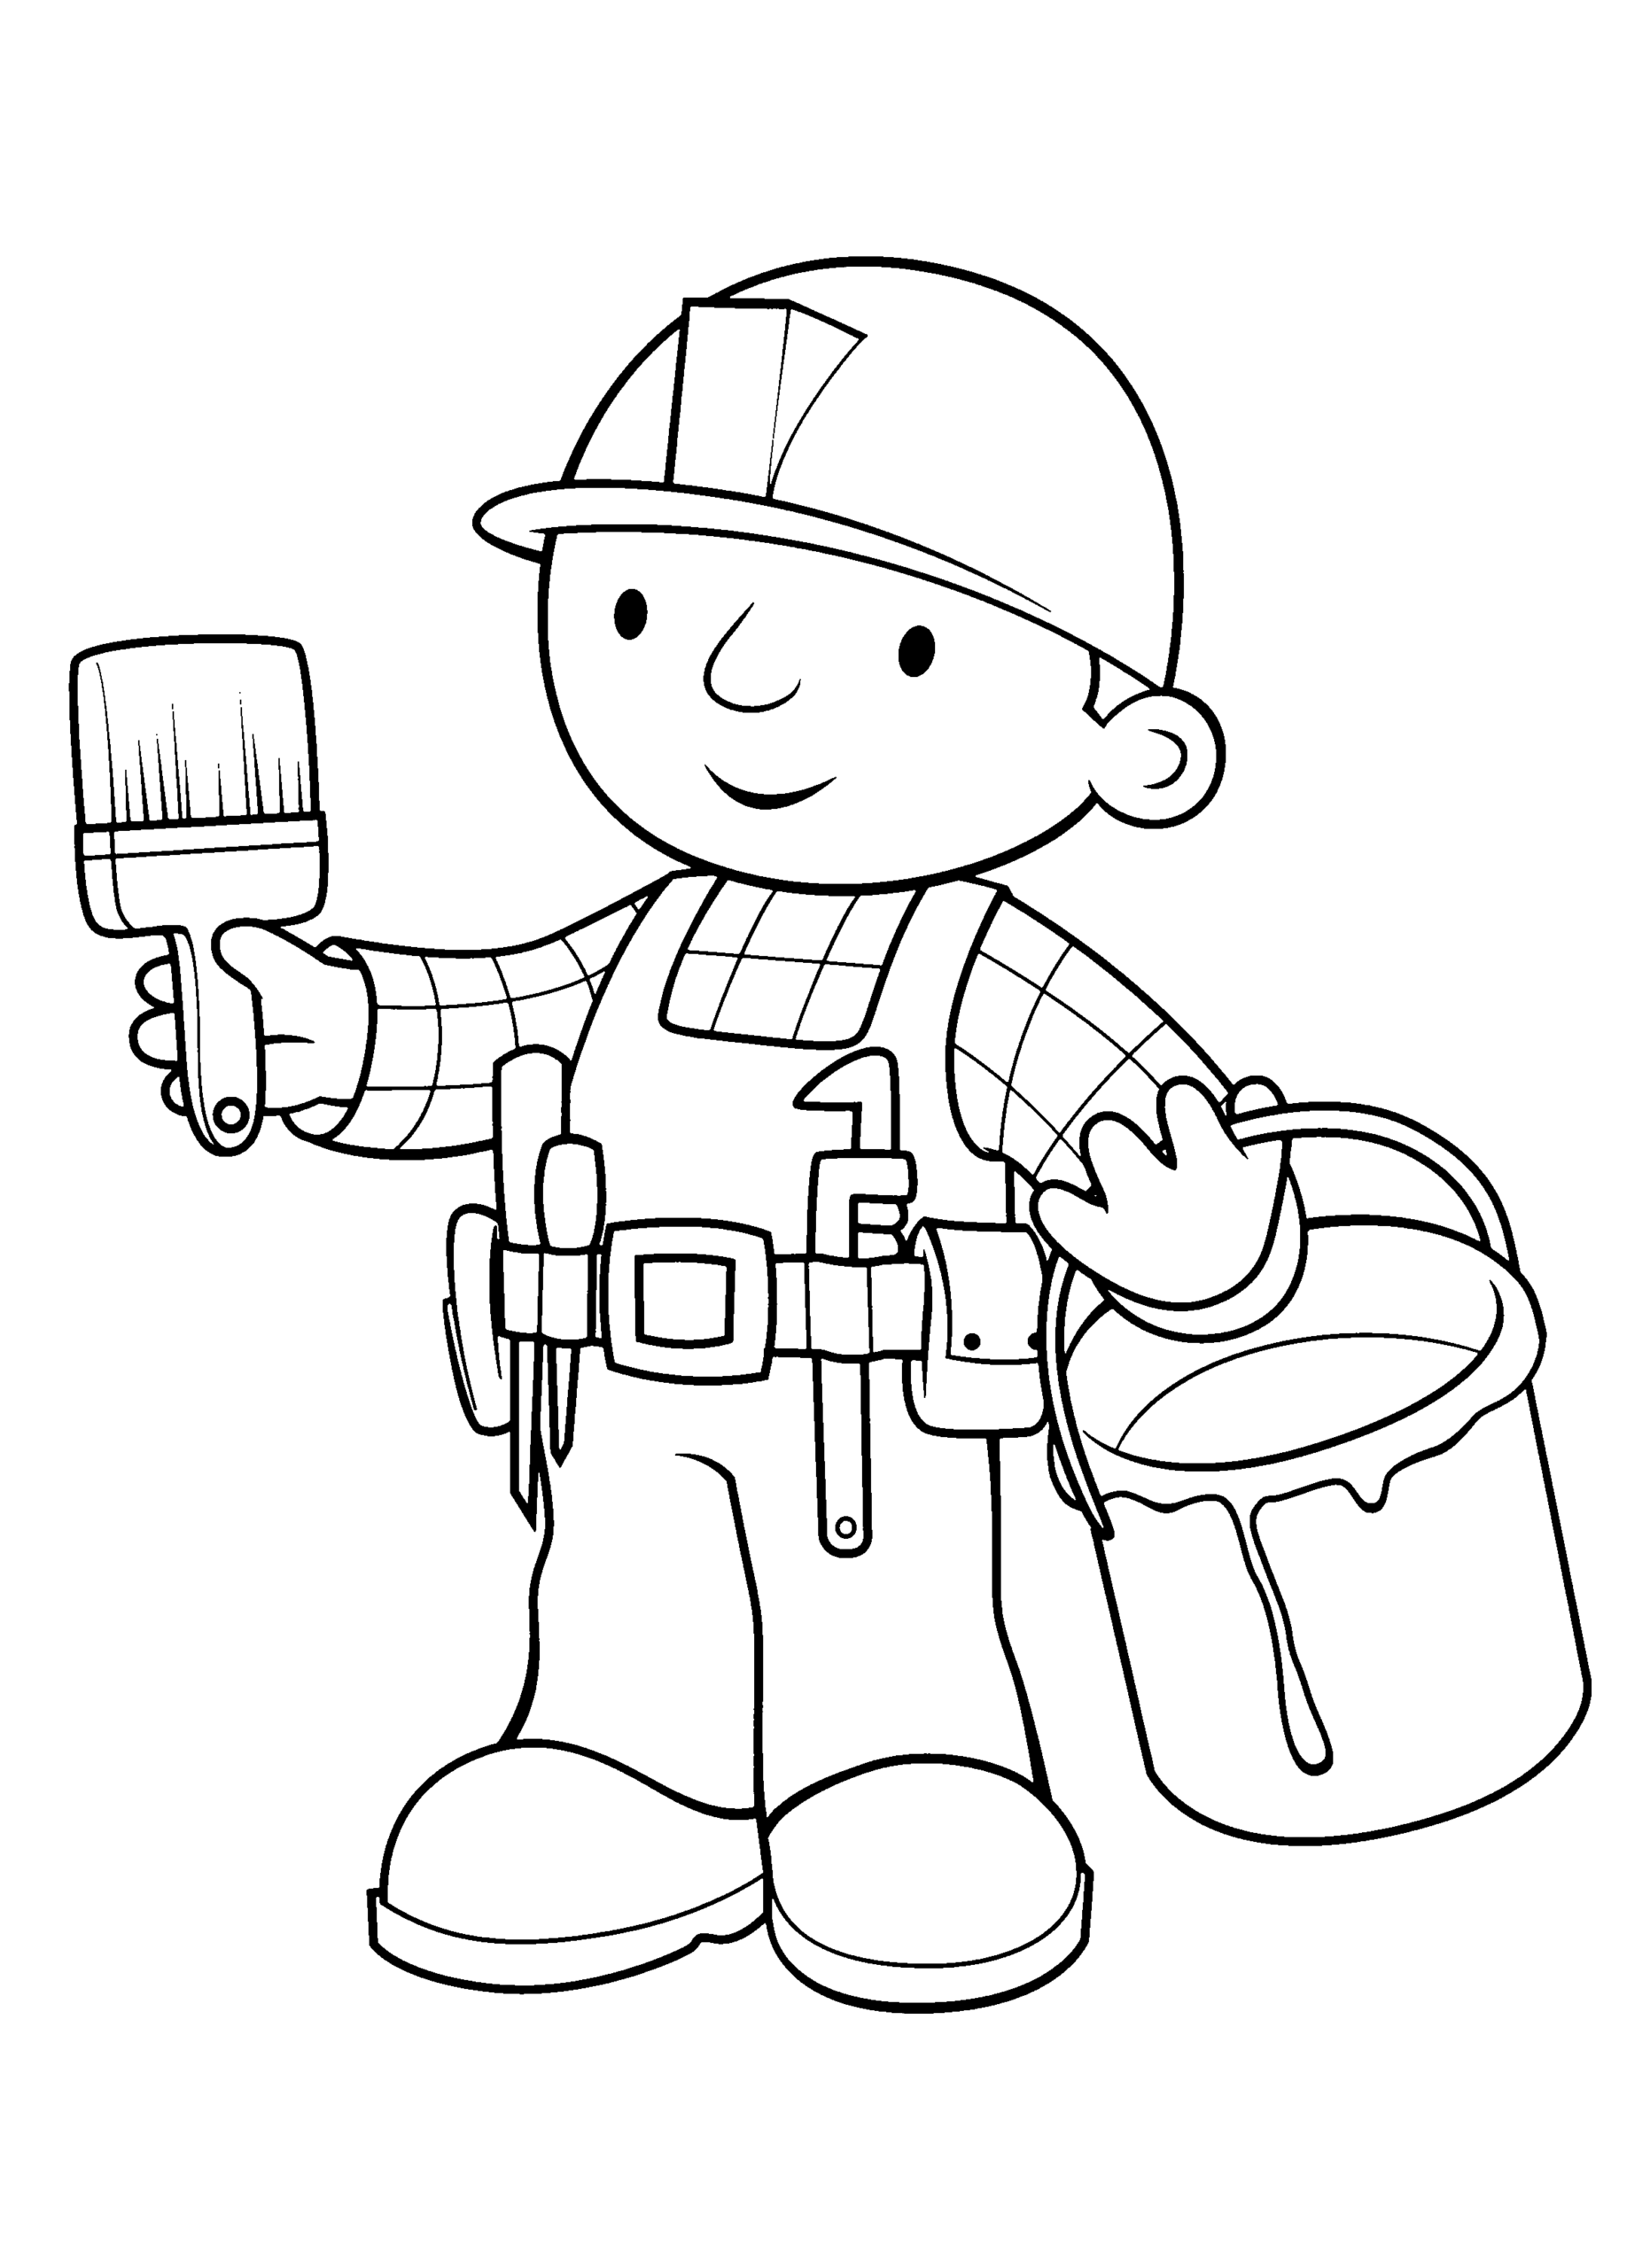 Bob the Builder Coloring Pages TV Film bob the builder 41 Printable 2020 01060 Coloring4free